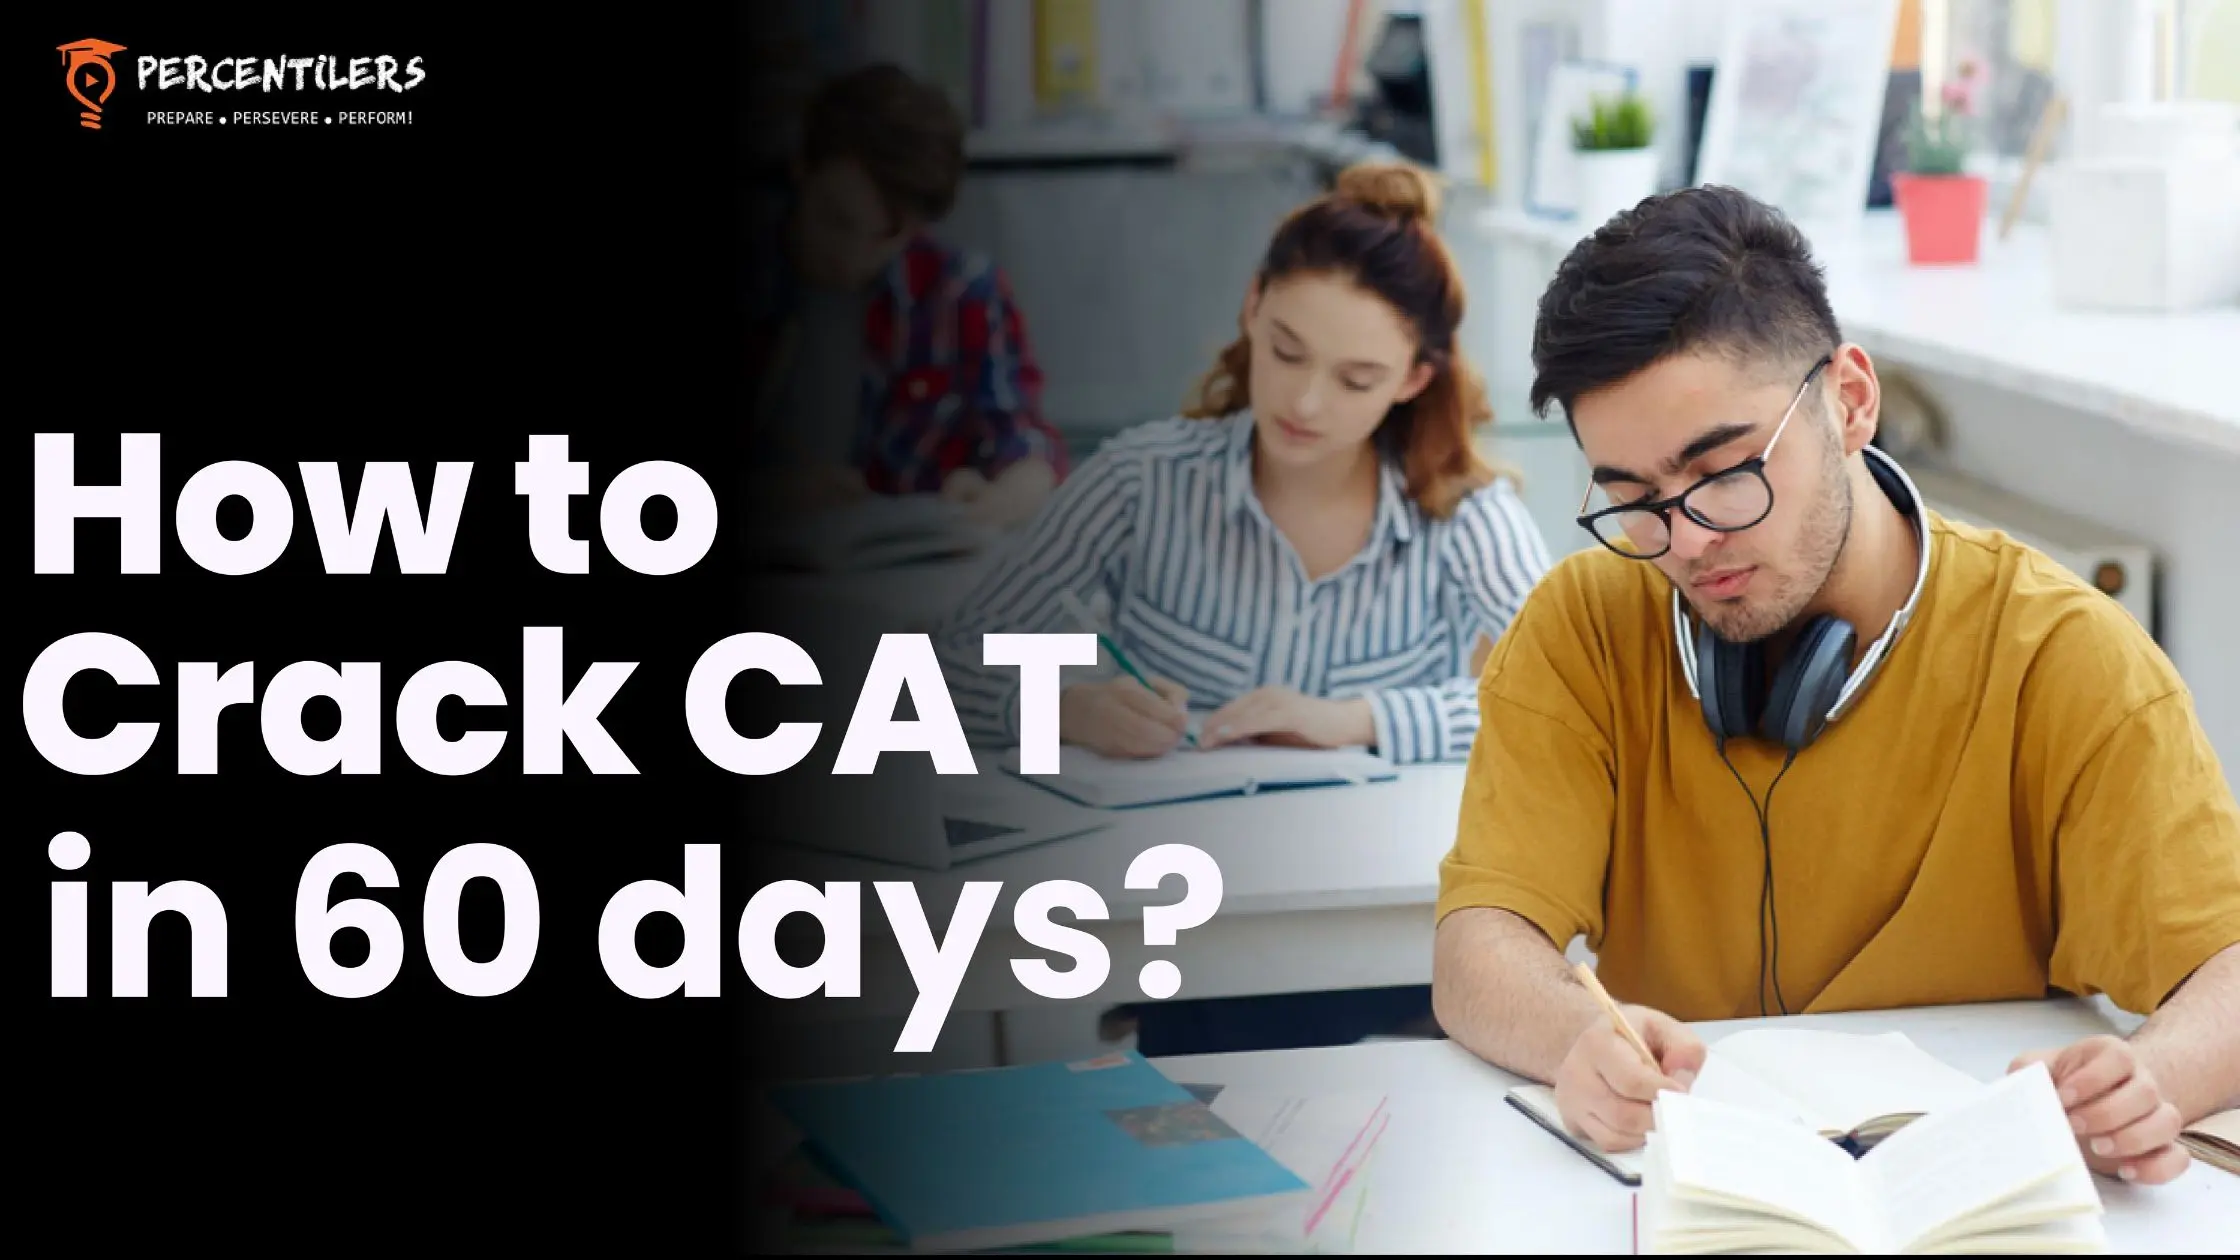 How to Crack CAT in 60 days